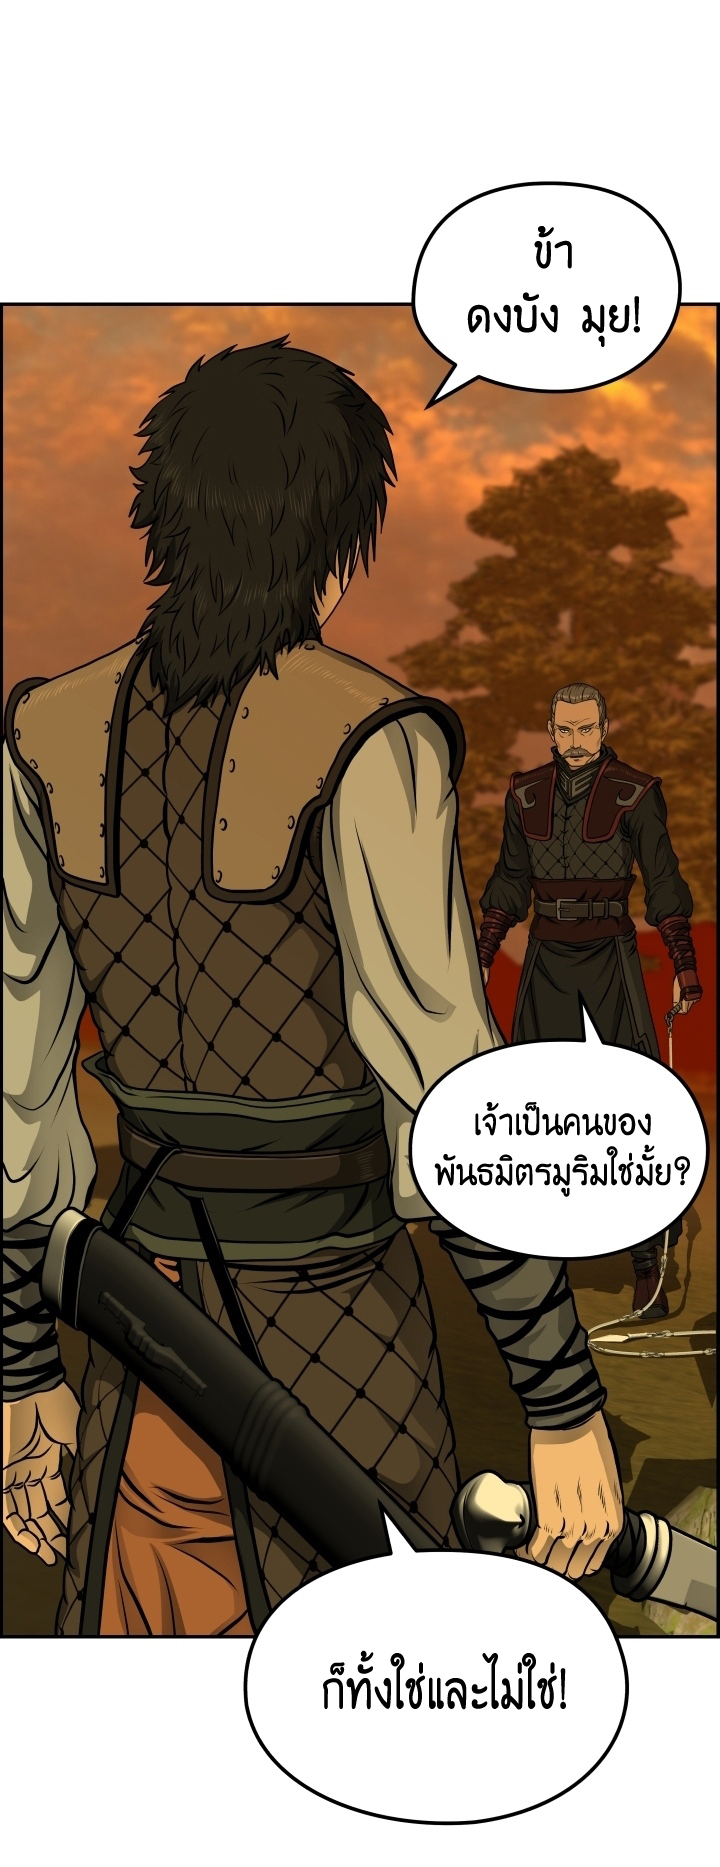 Blade of Wind and Thunder 28 (36)